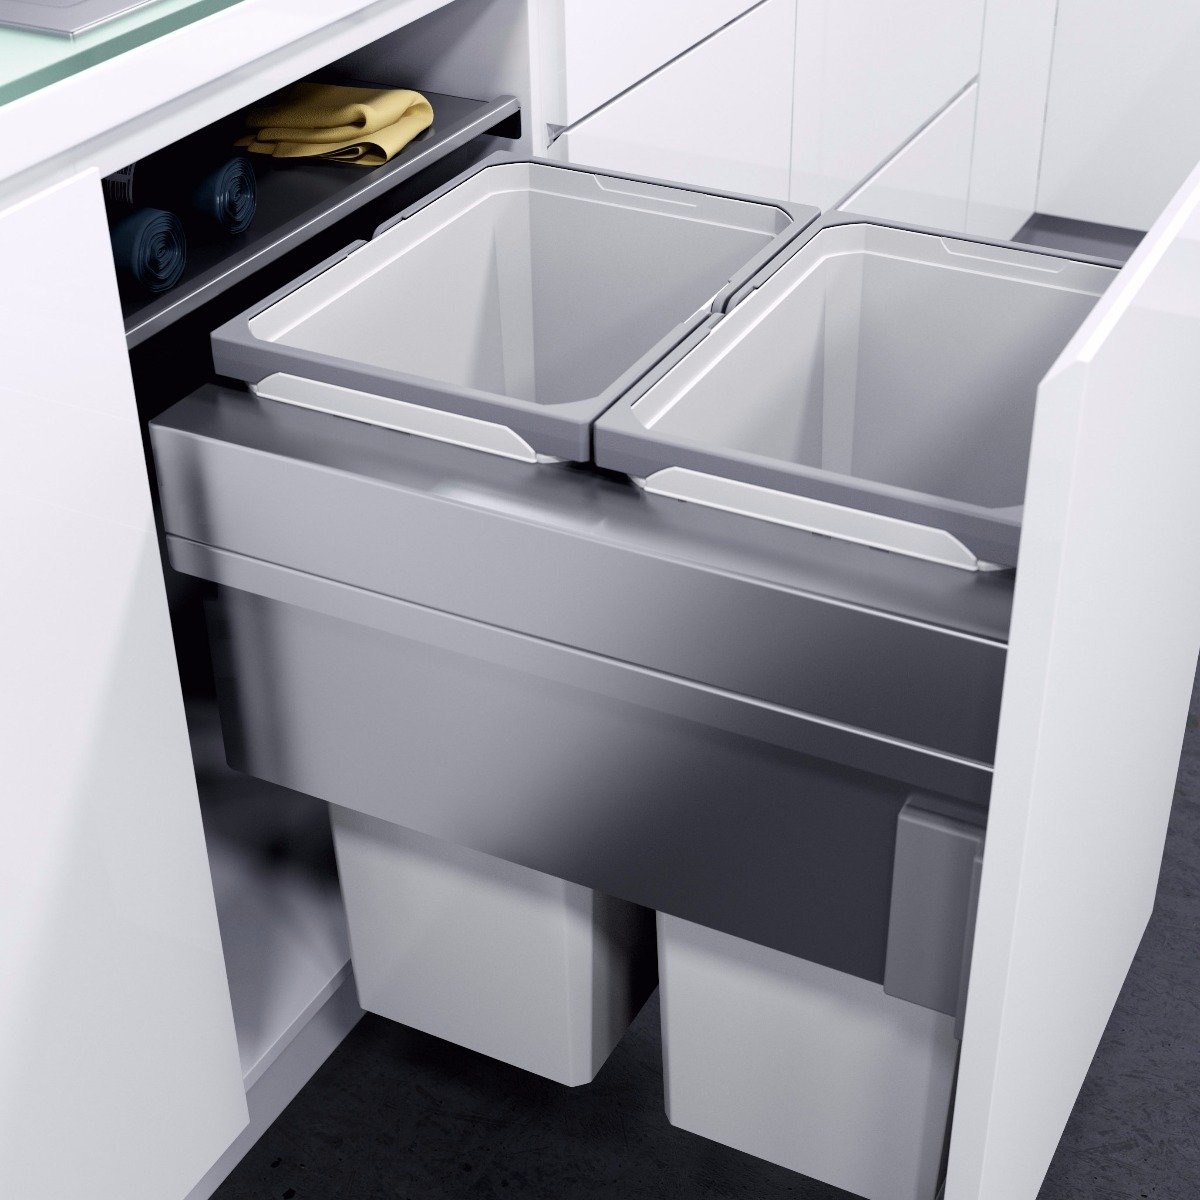 A well-designed integrated kitchen cabinet bin from Vauth-Sagel with two compartments,in a light silver grey colourway.